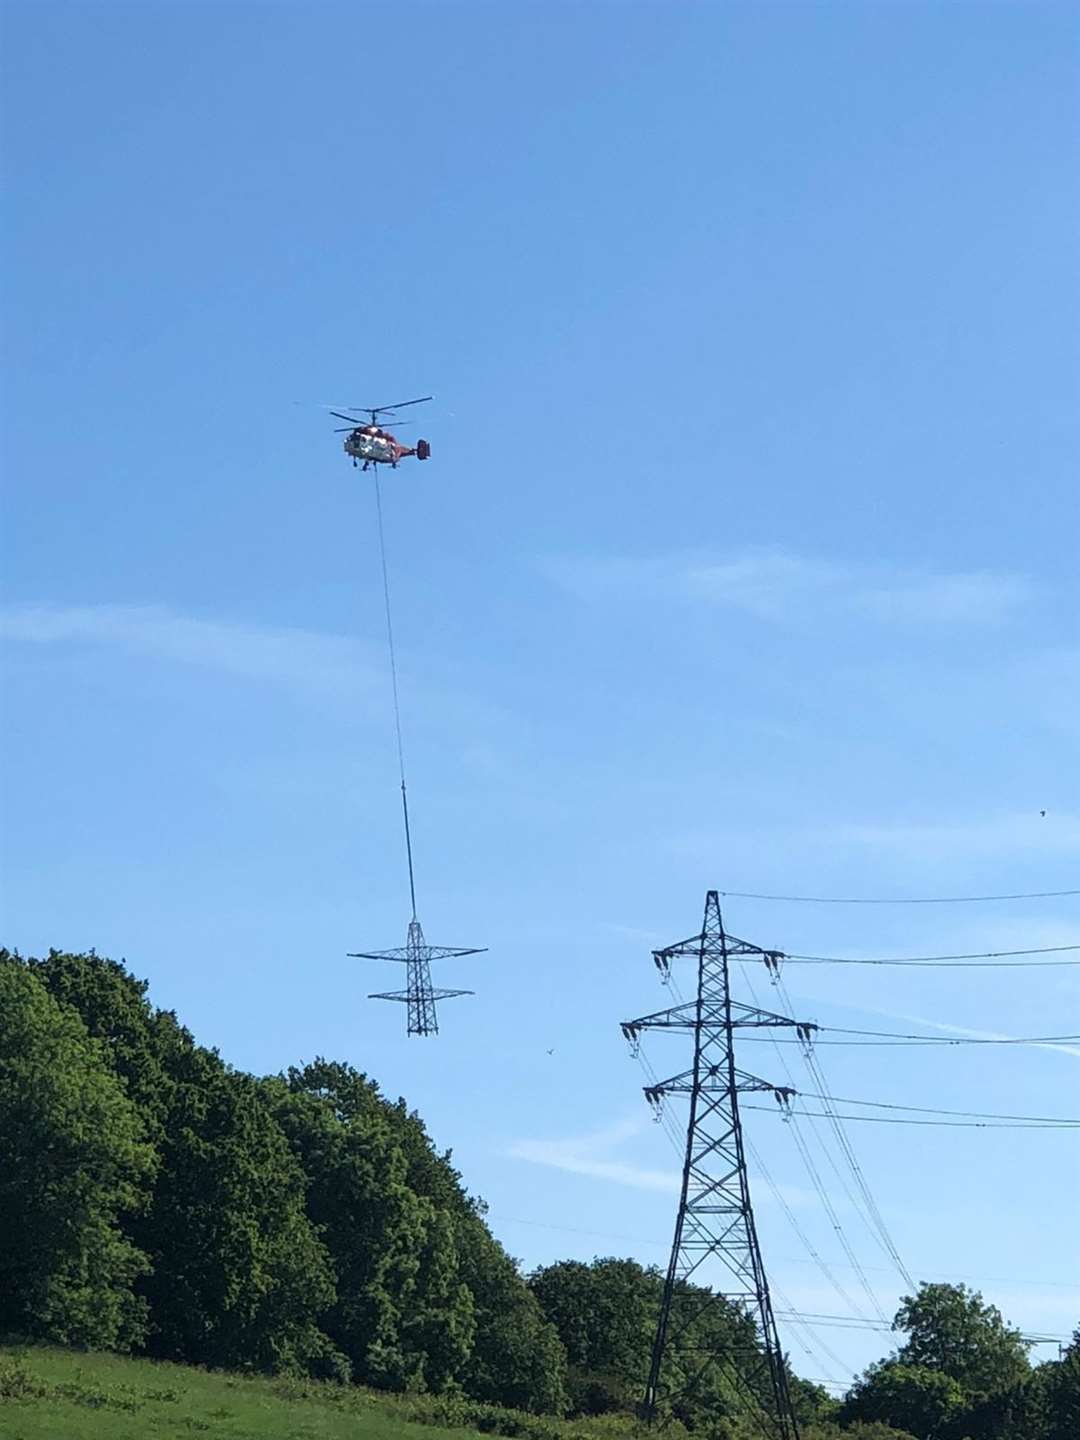 The Swiss Helirig KA-32 Kamov helicopter at work removing. Picture National Grid